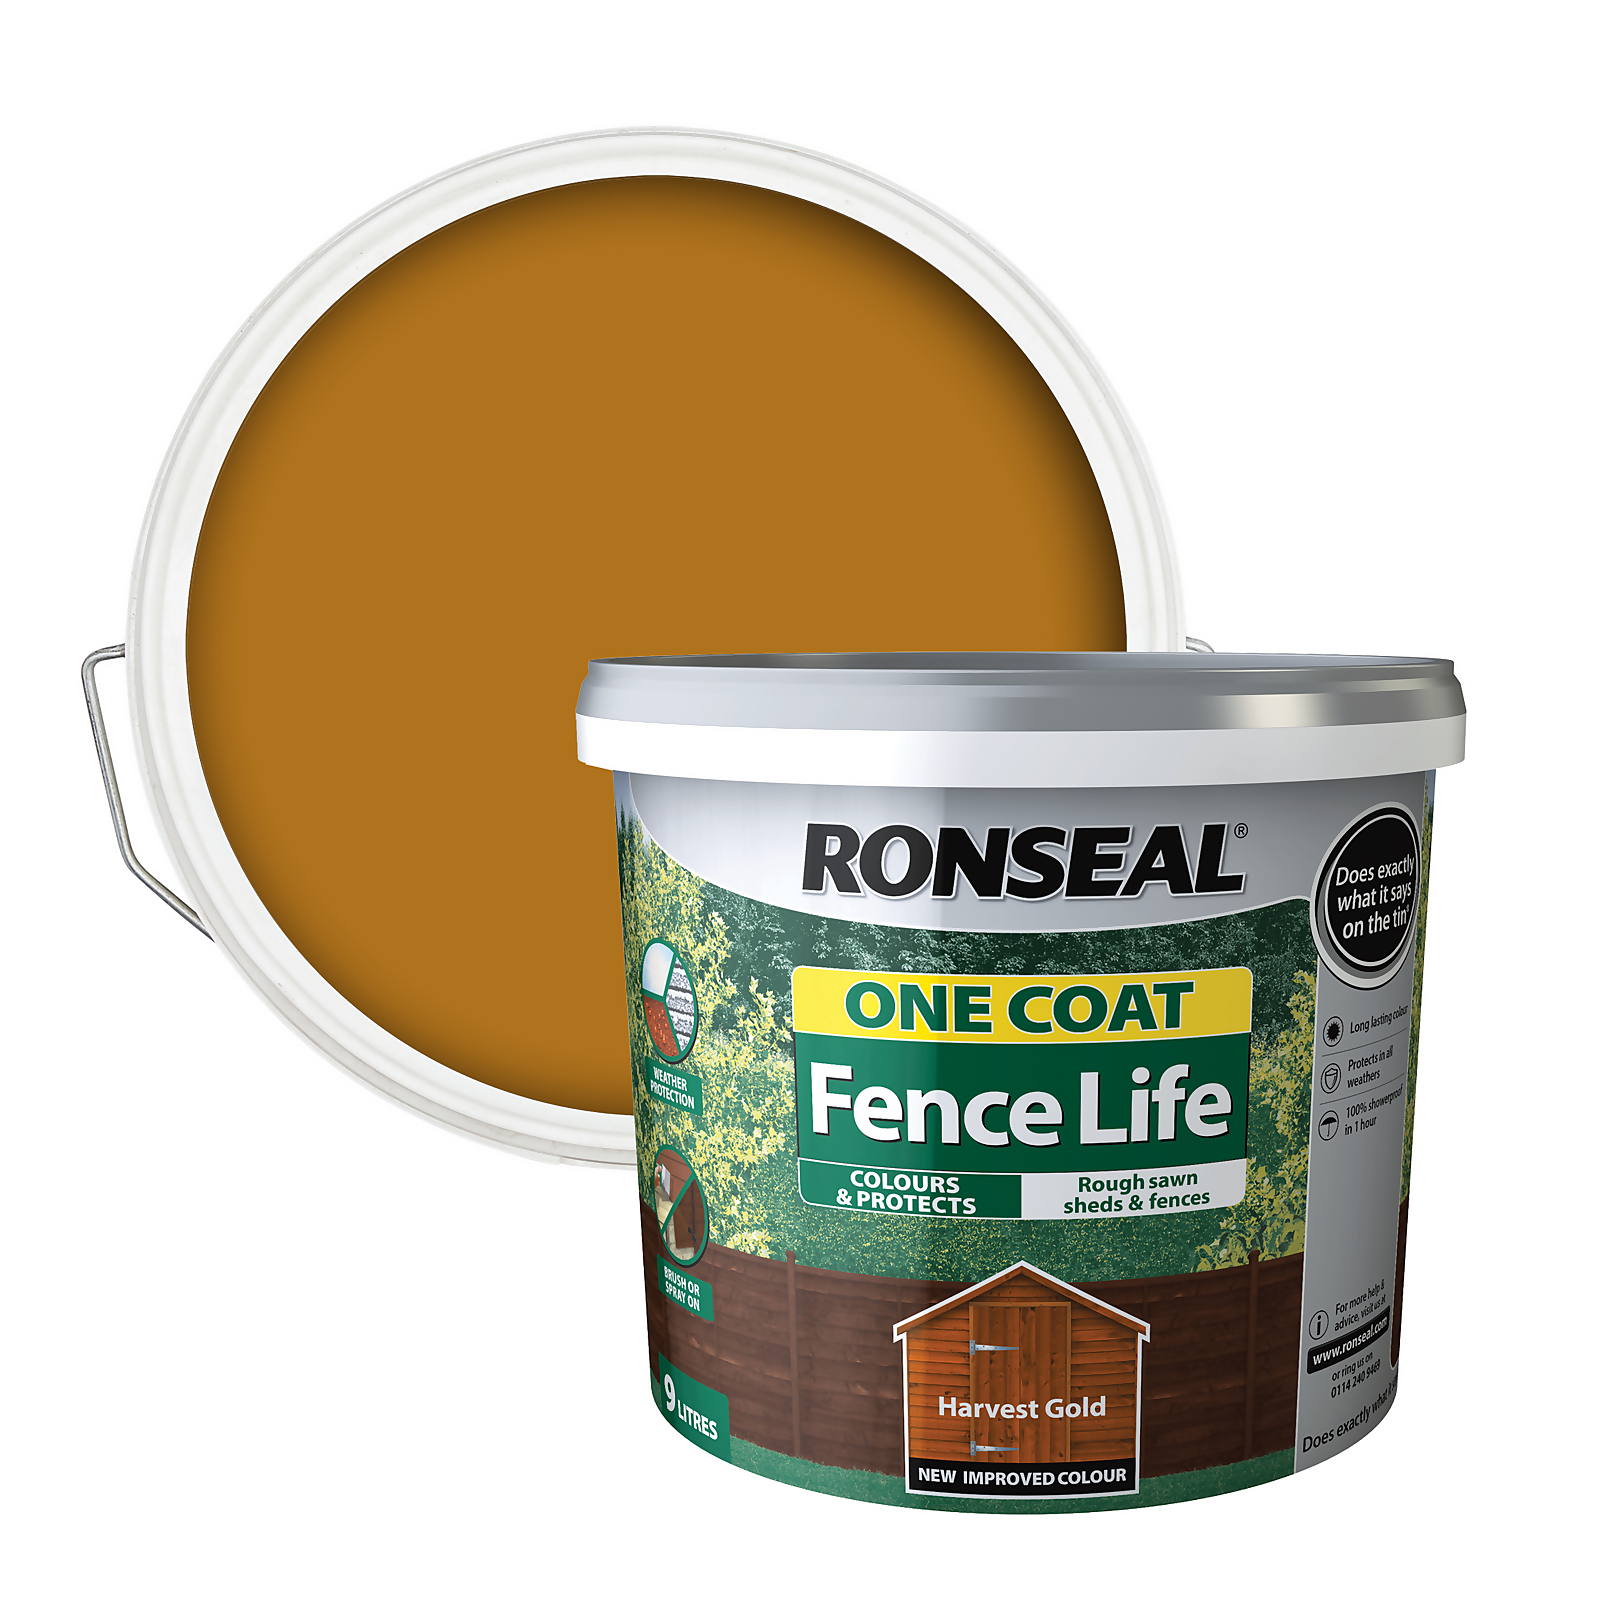 Photo of Ronseal One Coat Fence Life Paint Tudor Harvest Gold - 9l